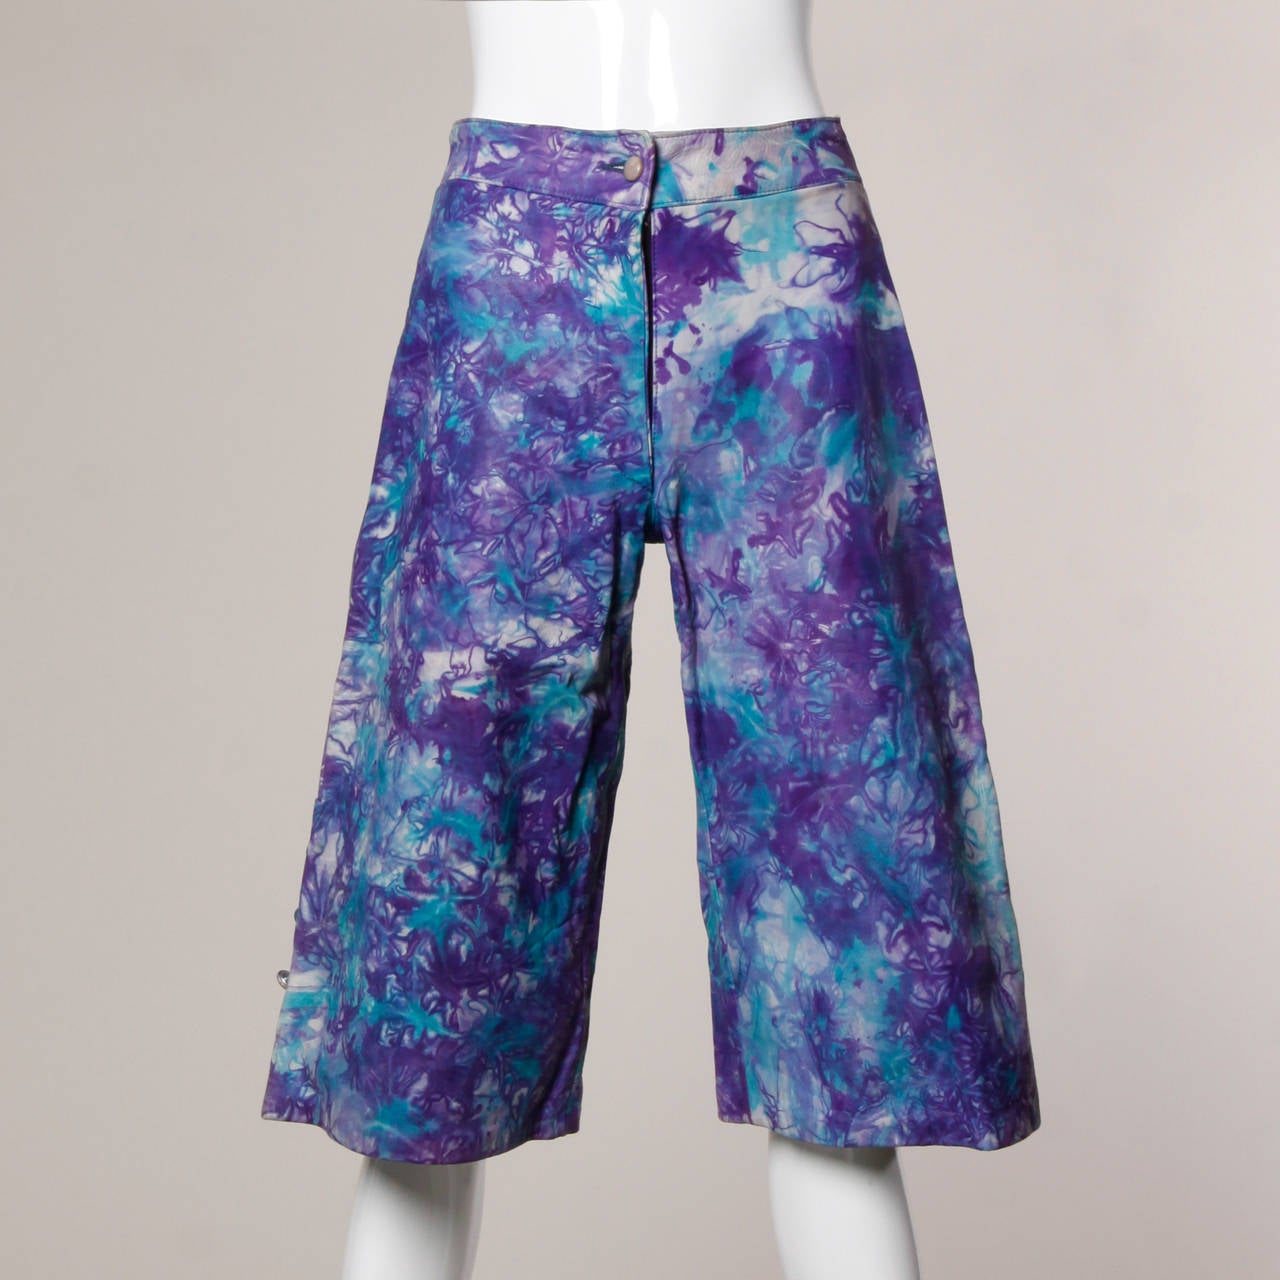 Soft and pliable genuine leather vintage shorts or cropped paints in hand-painted marbled purple and blue. Incredible design and vibrant colors.

Details:

Unlined
Front Button and Metal Zip Closure
Marked Size: 8
Estimated Size: